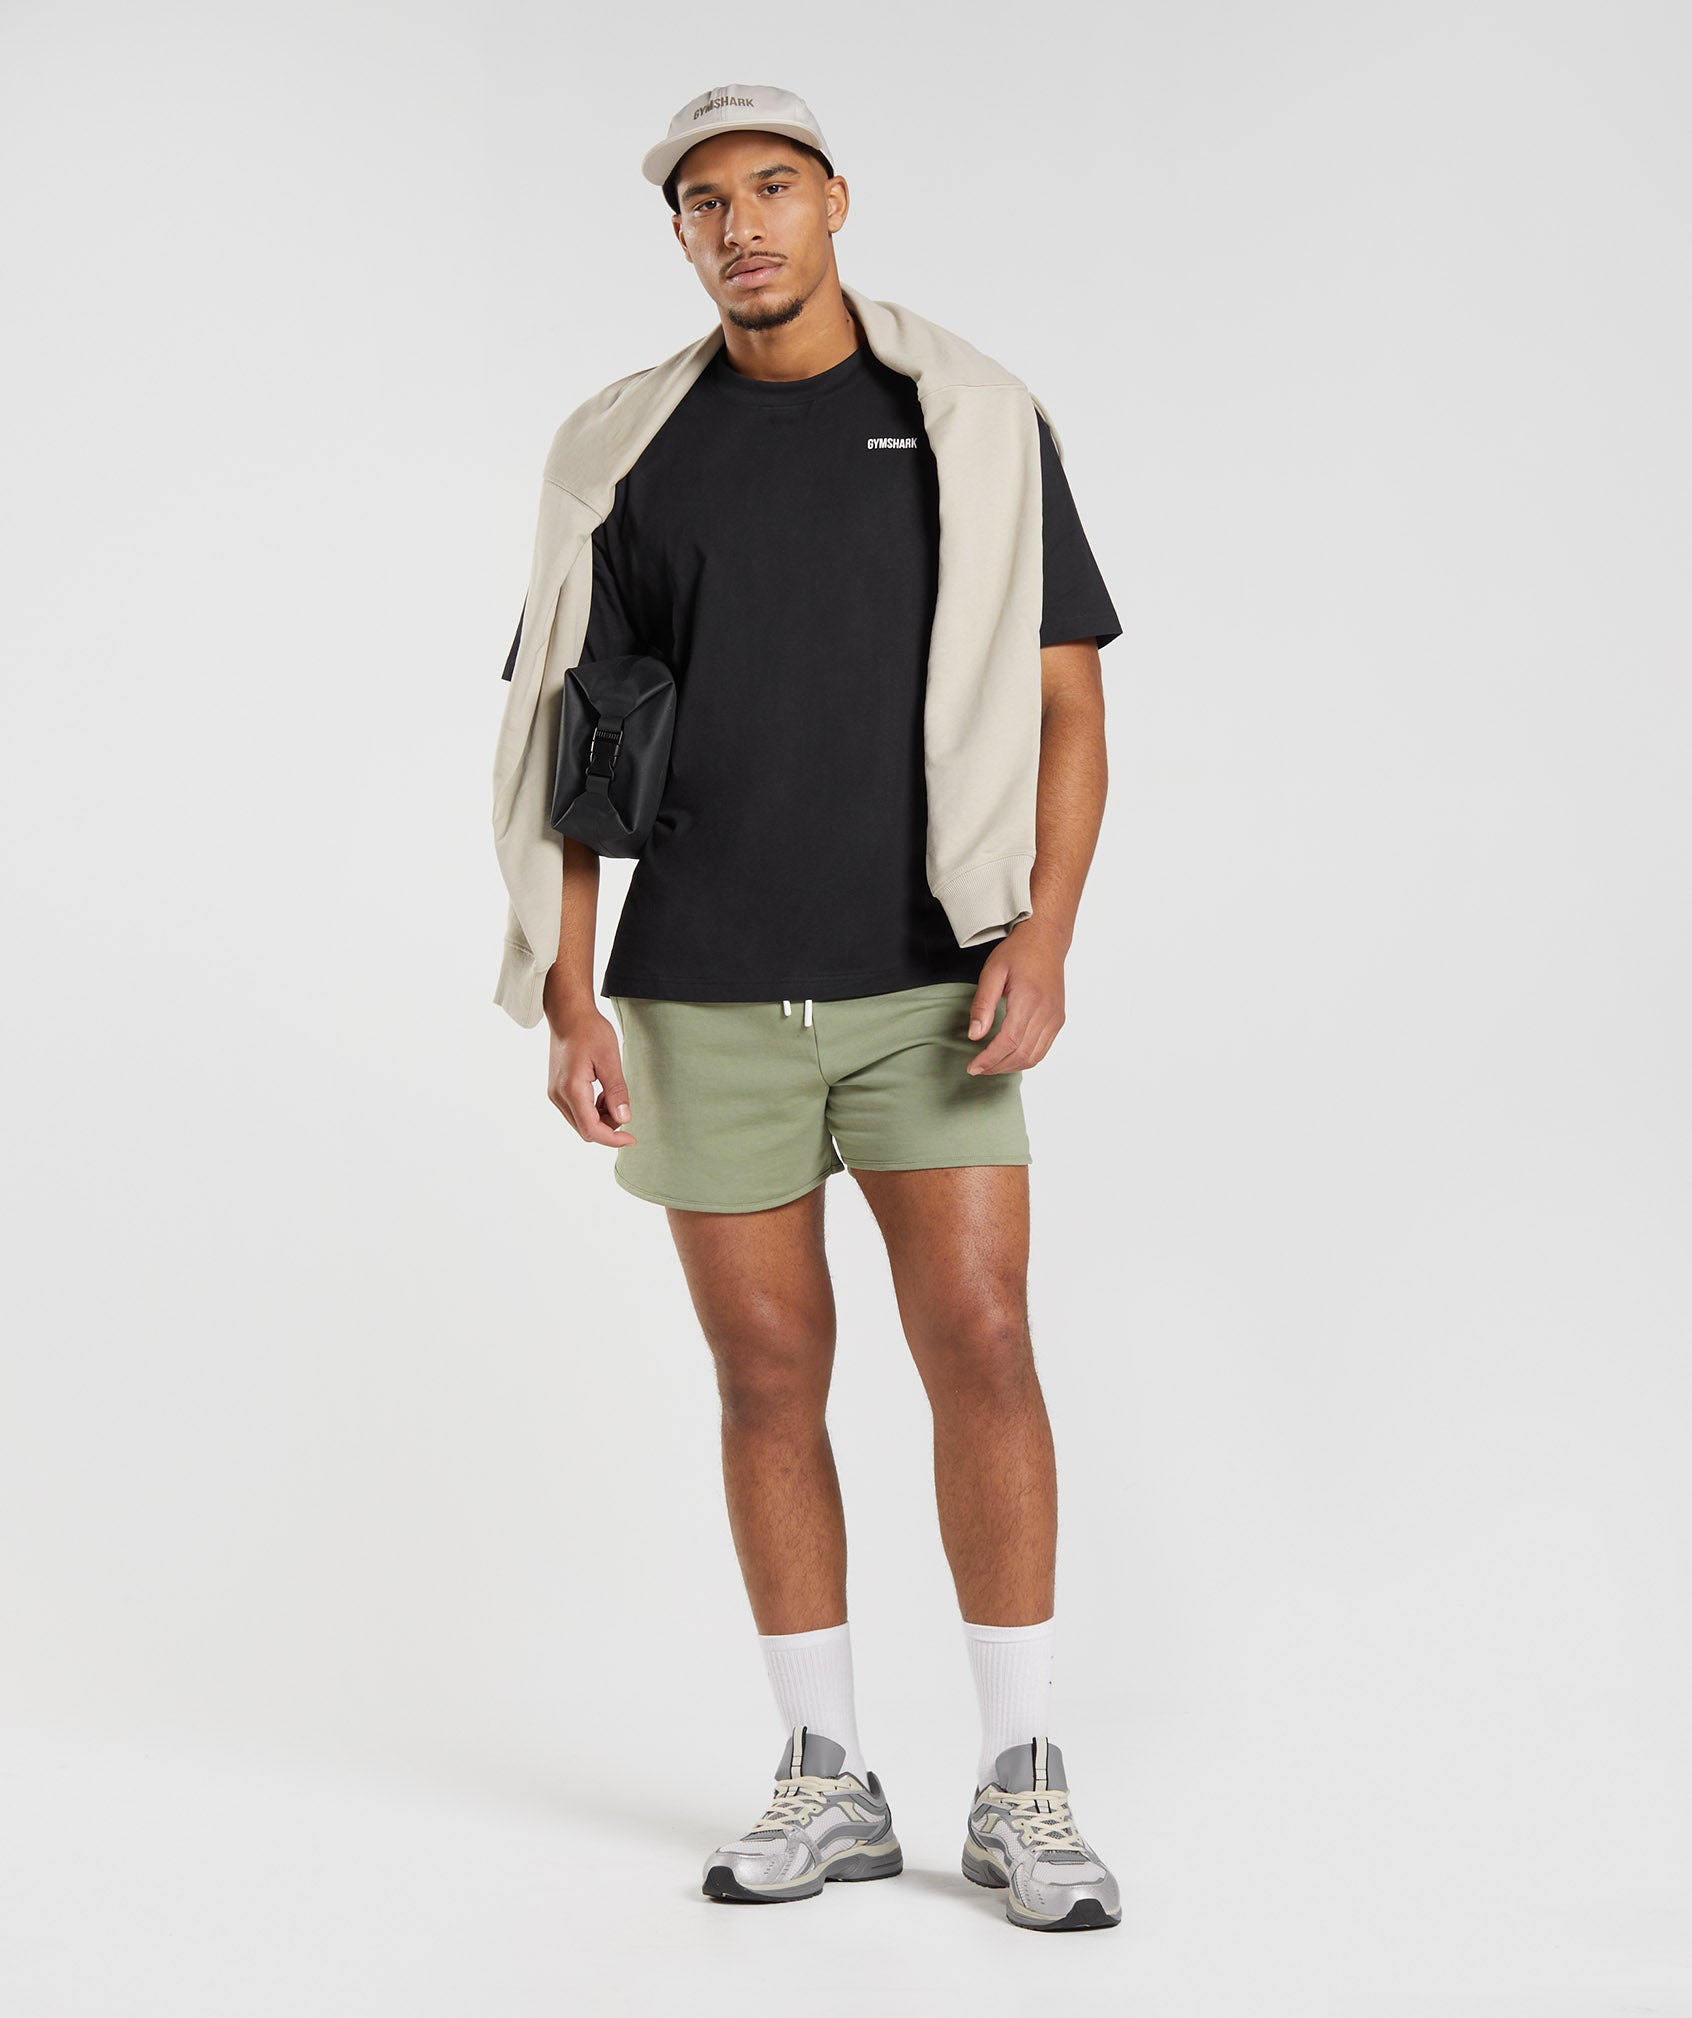 Rest Day Sweats 4'' Lounge Shorts in Sage Green - view 4